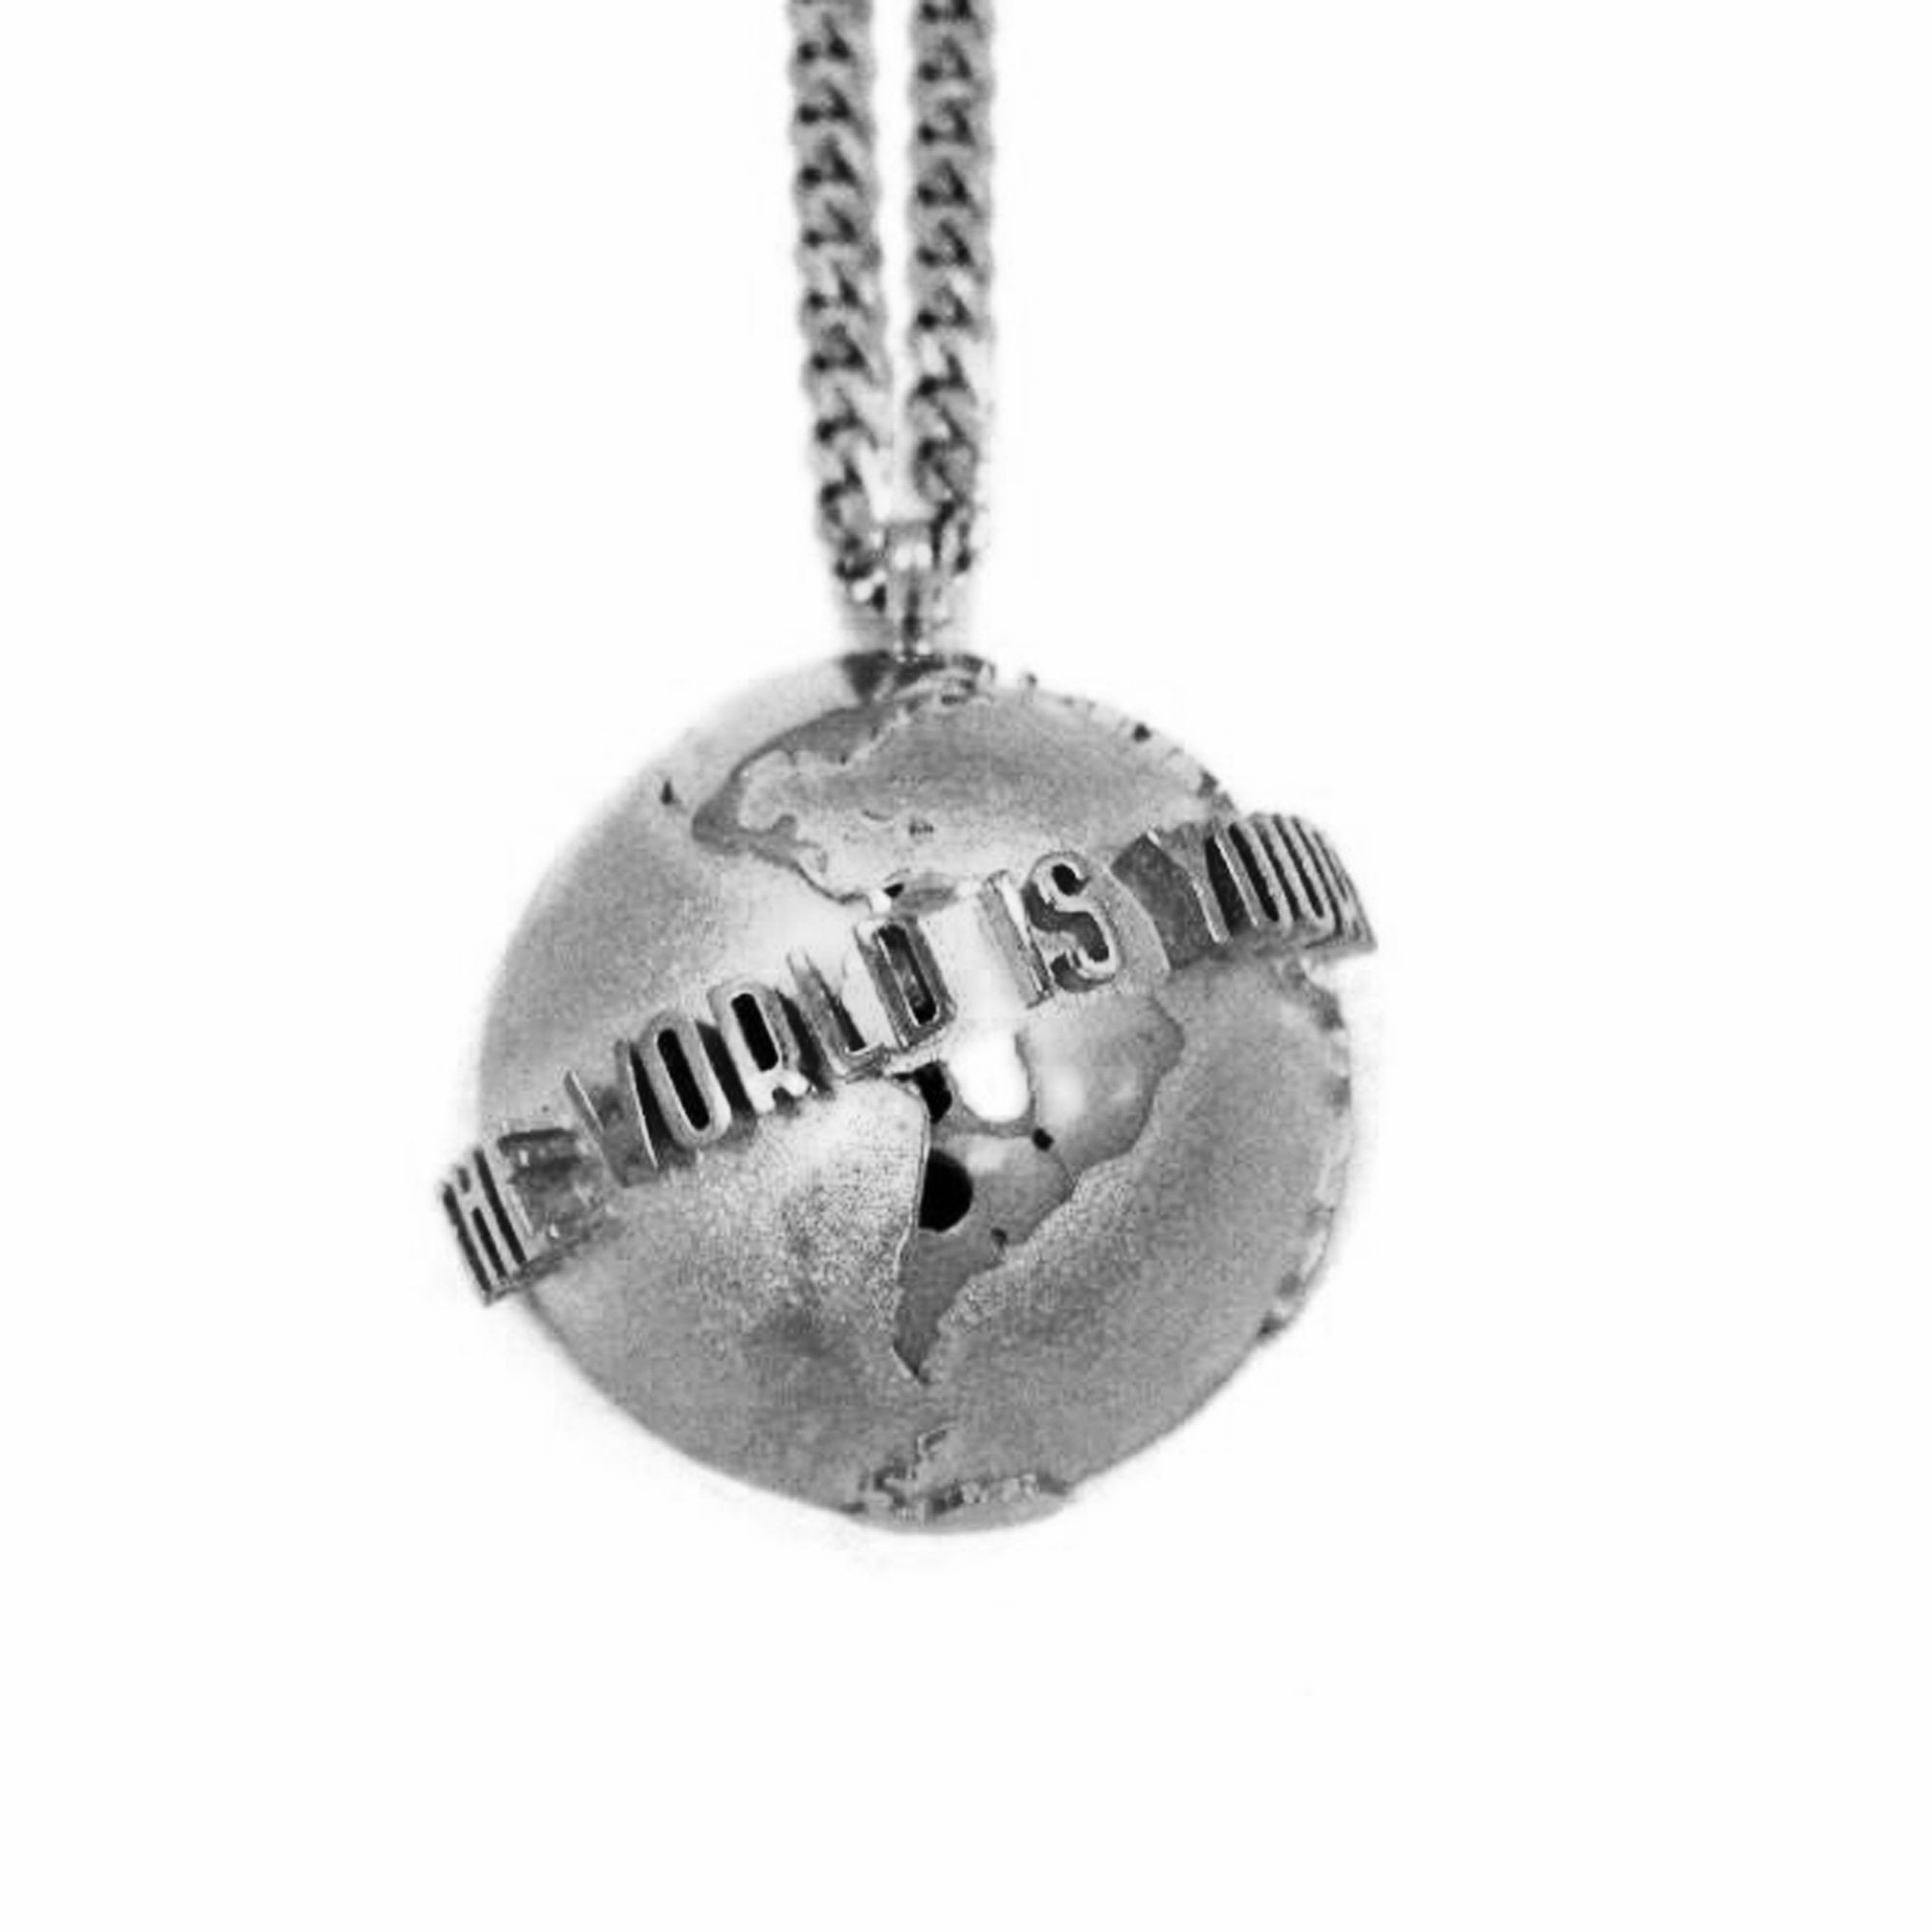 The World is Yours Pendant